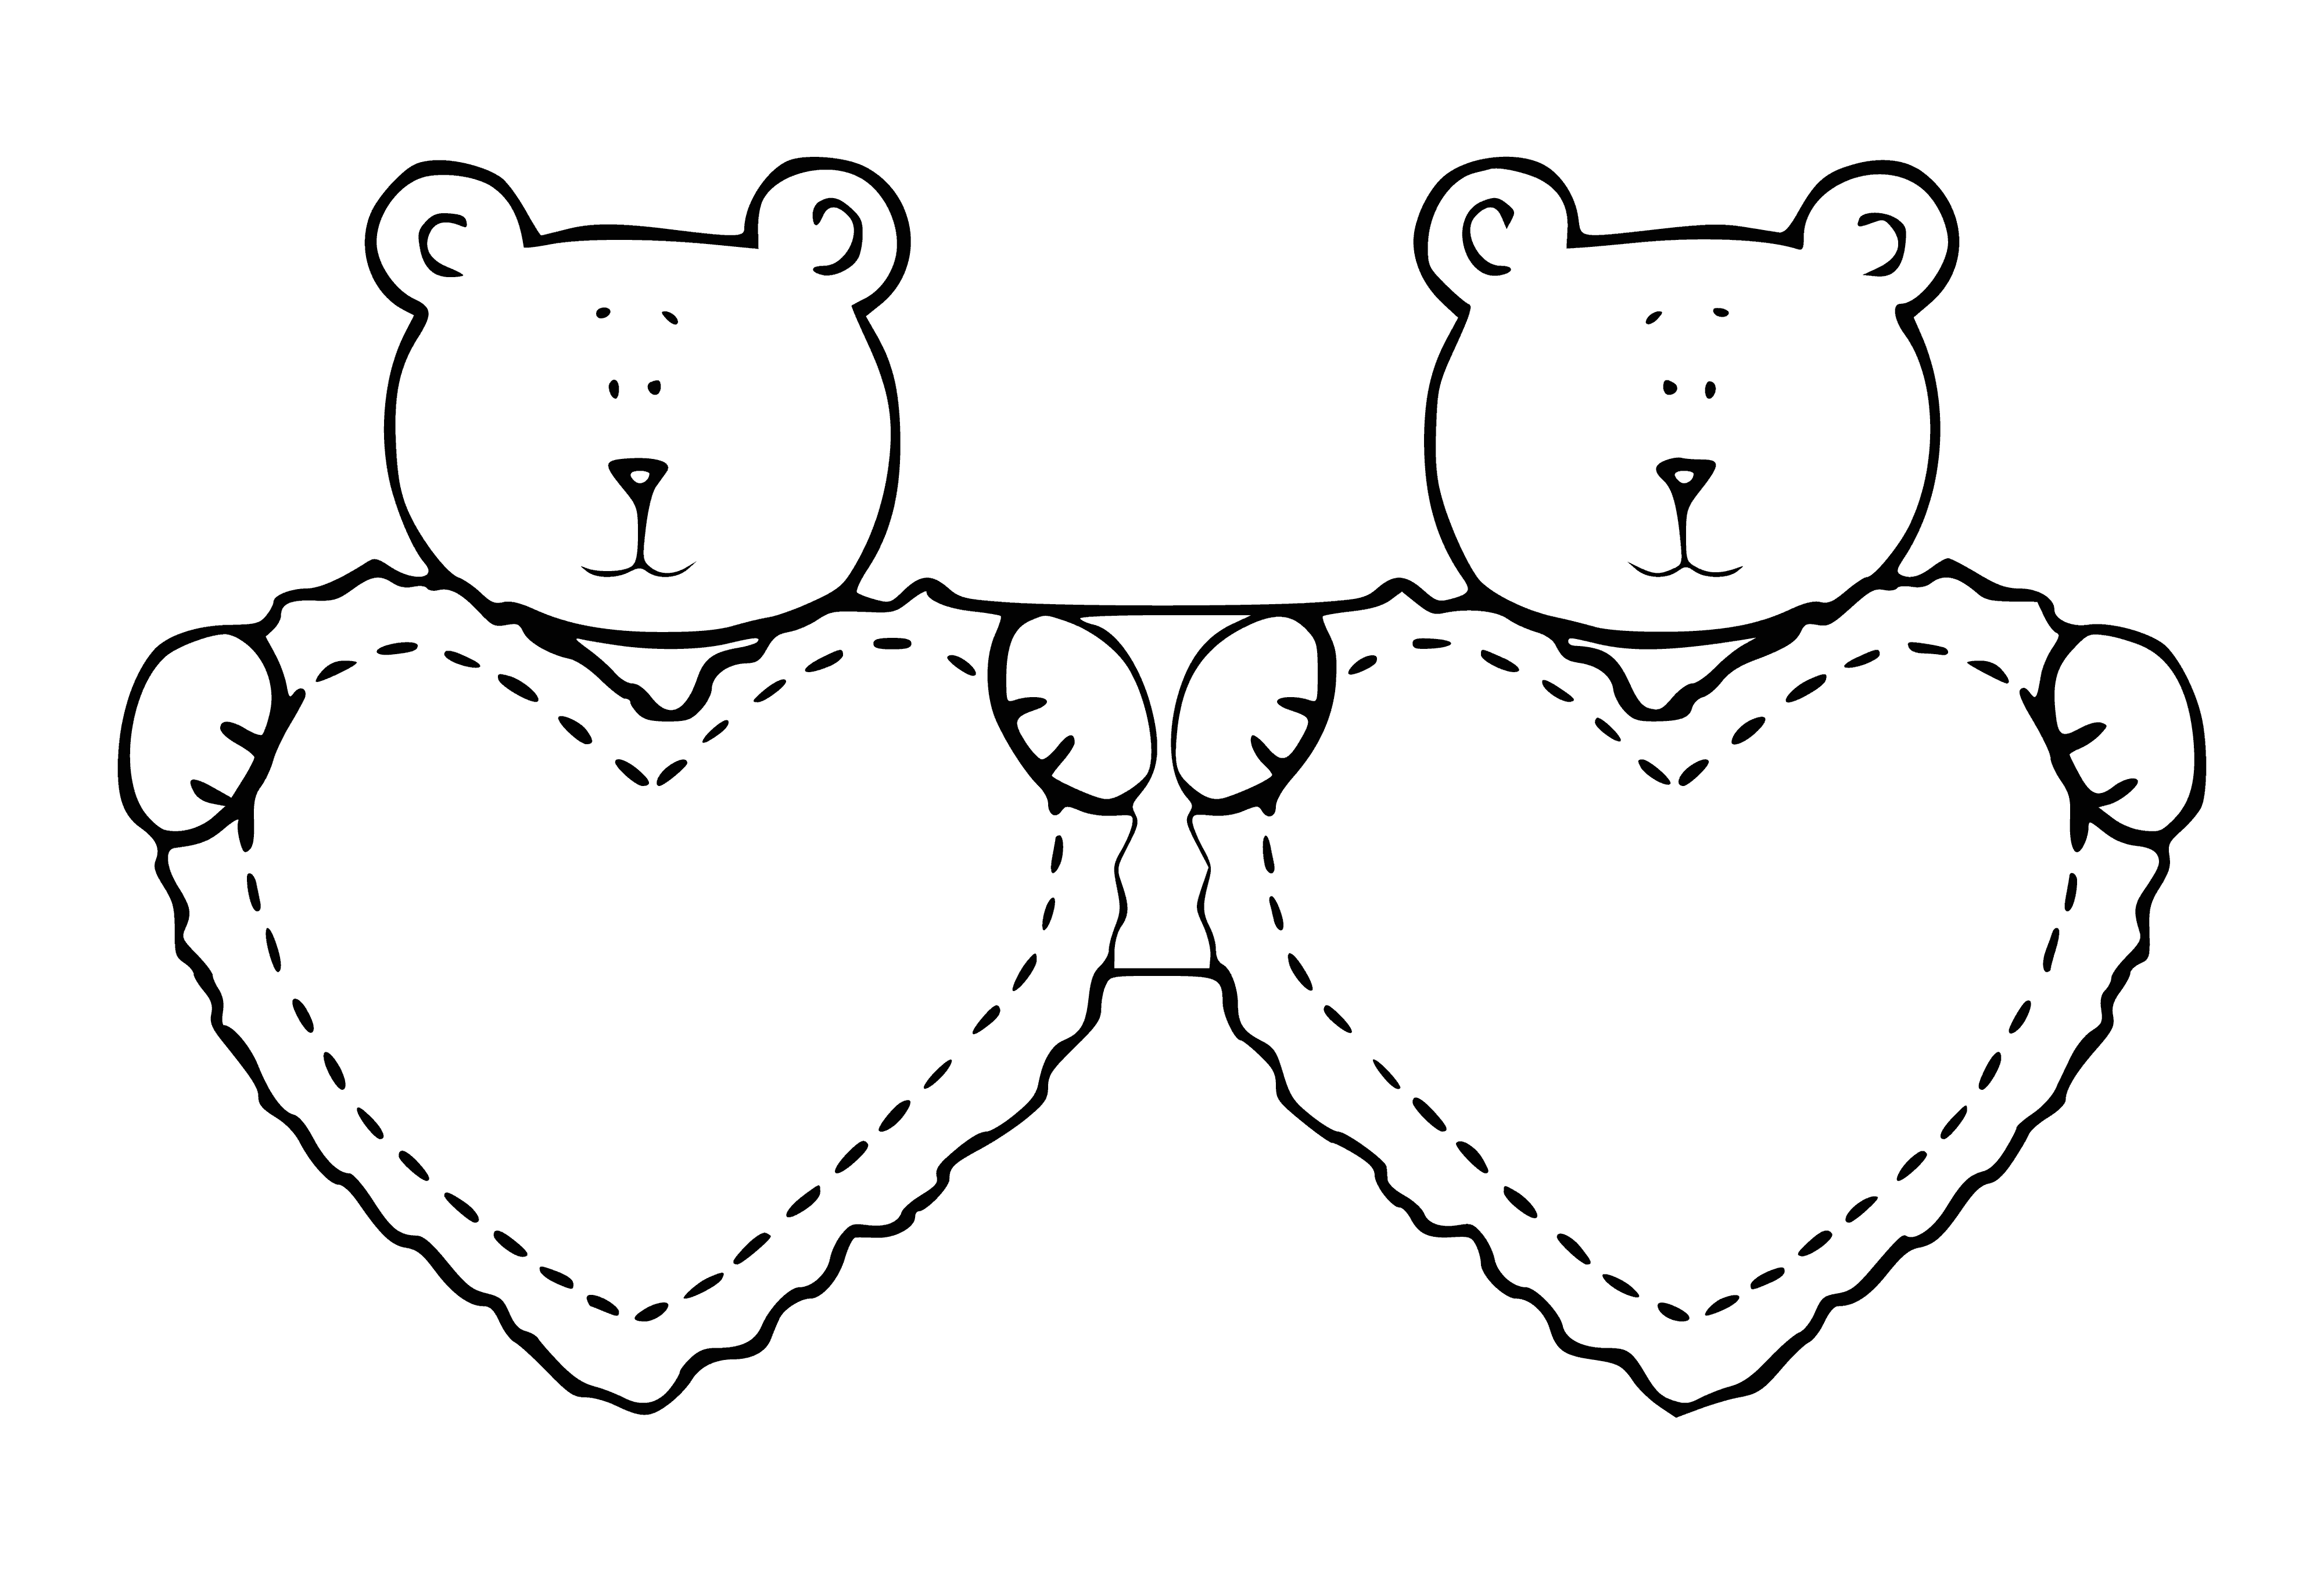 coloring page: Two teddy bears facing each other with arms around, noses touching & a red heart between them. #cute